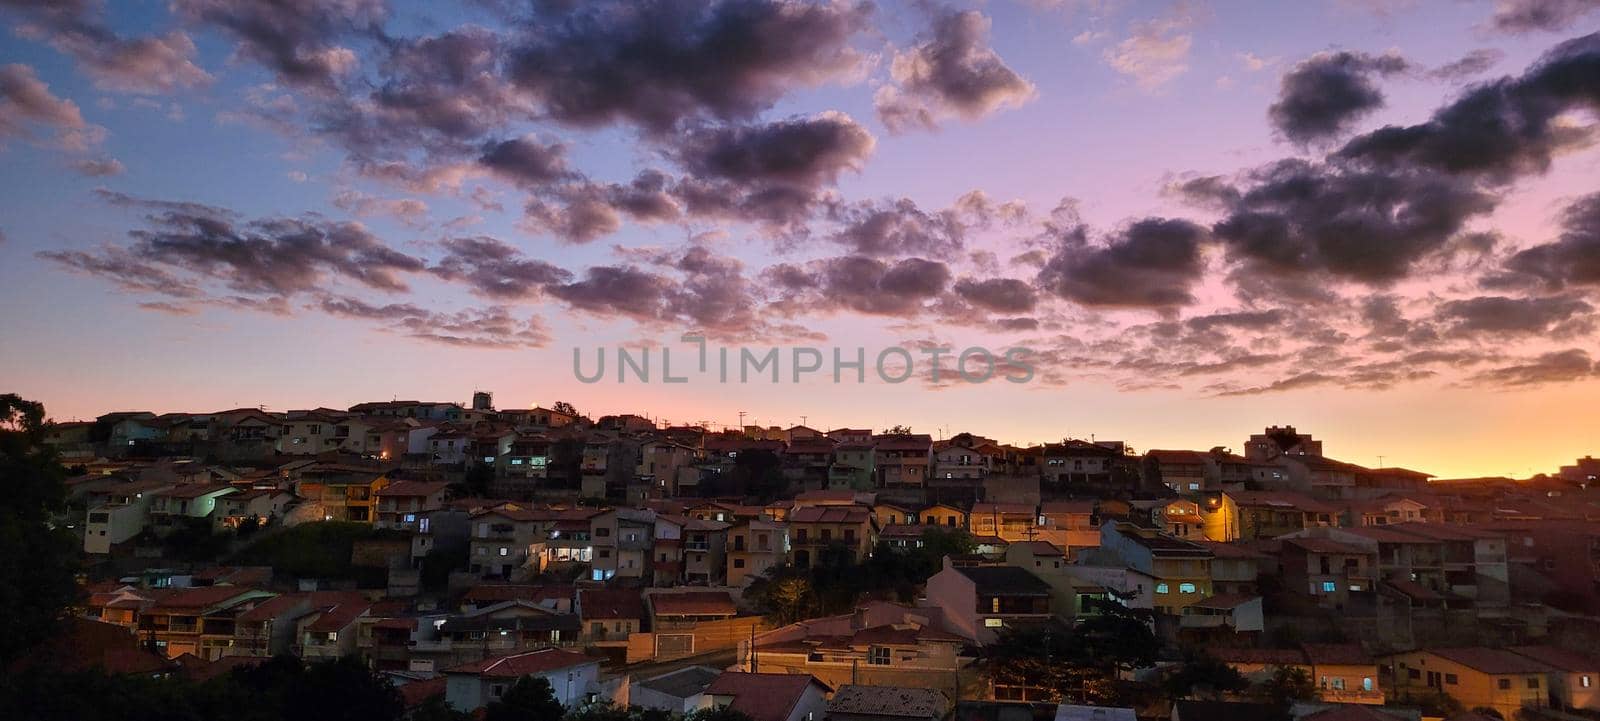 image of colorful sky with dark clouds in late afternoon in Brazil